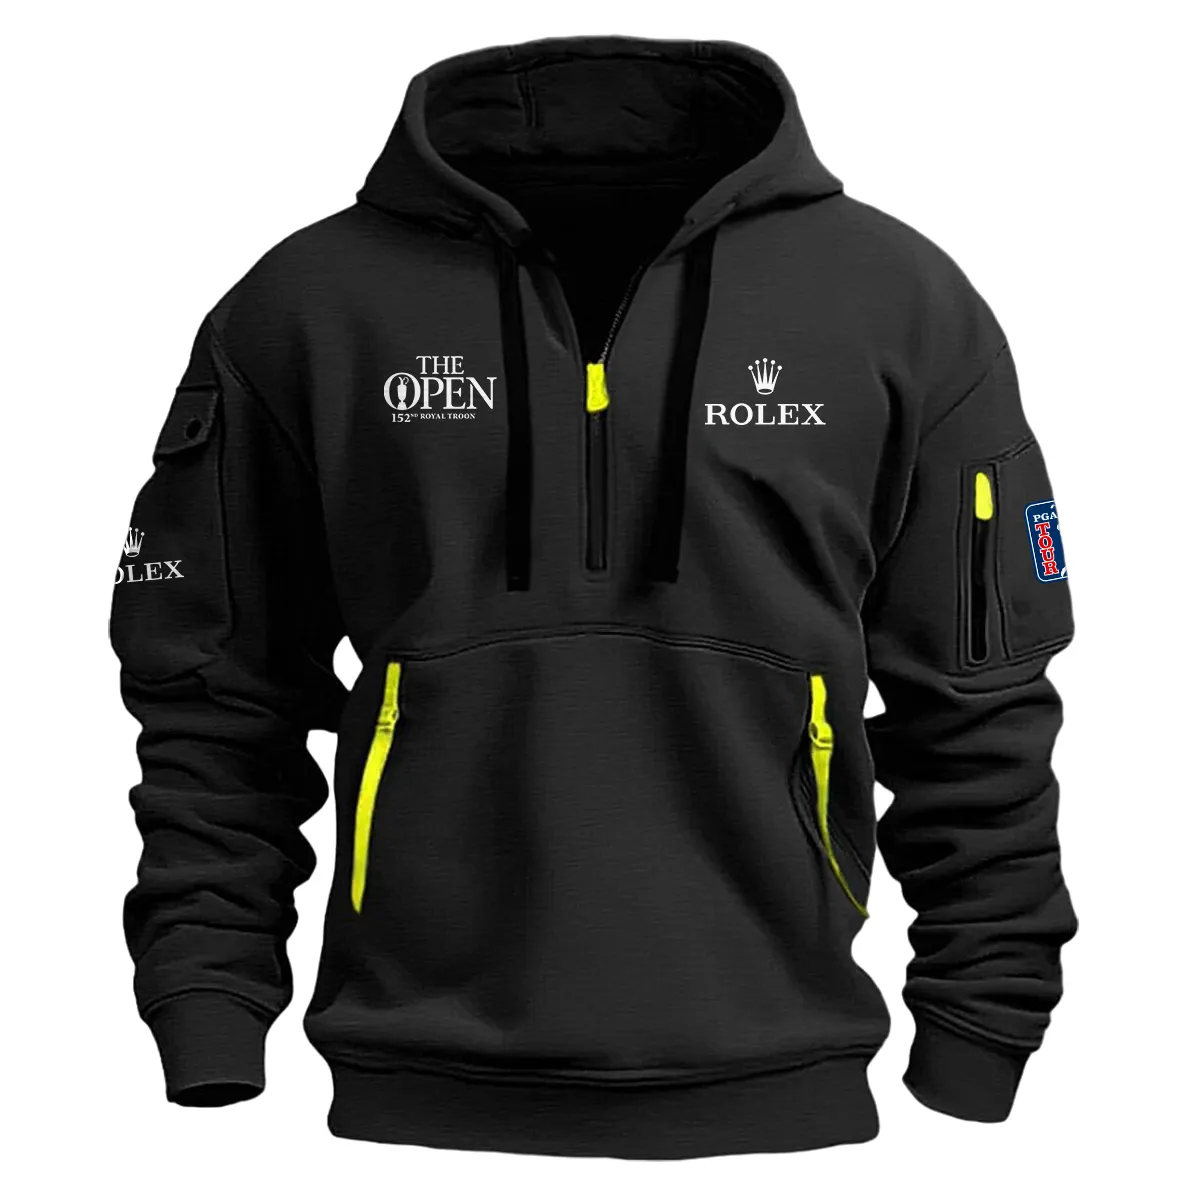 Black Color Rolex Fashion Hoodie Half Zipper 152nd The Open Championship Gift For Fans